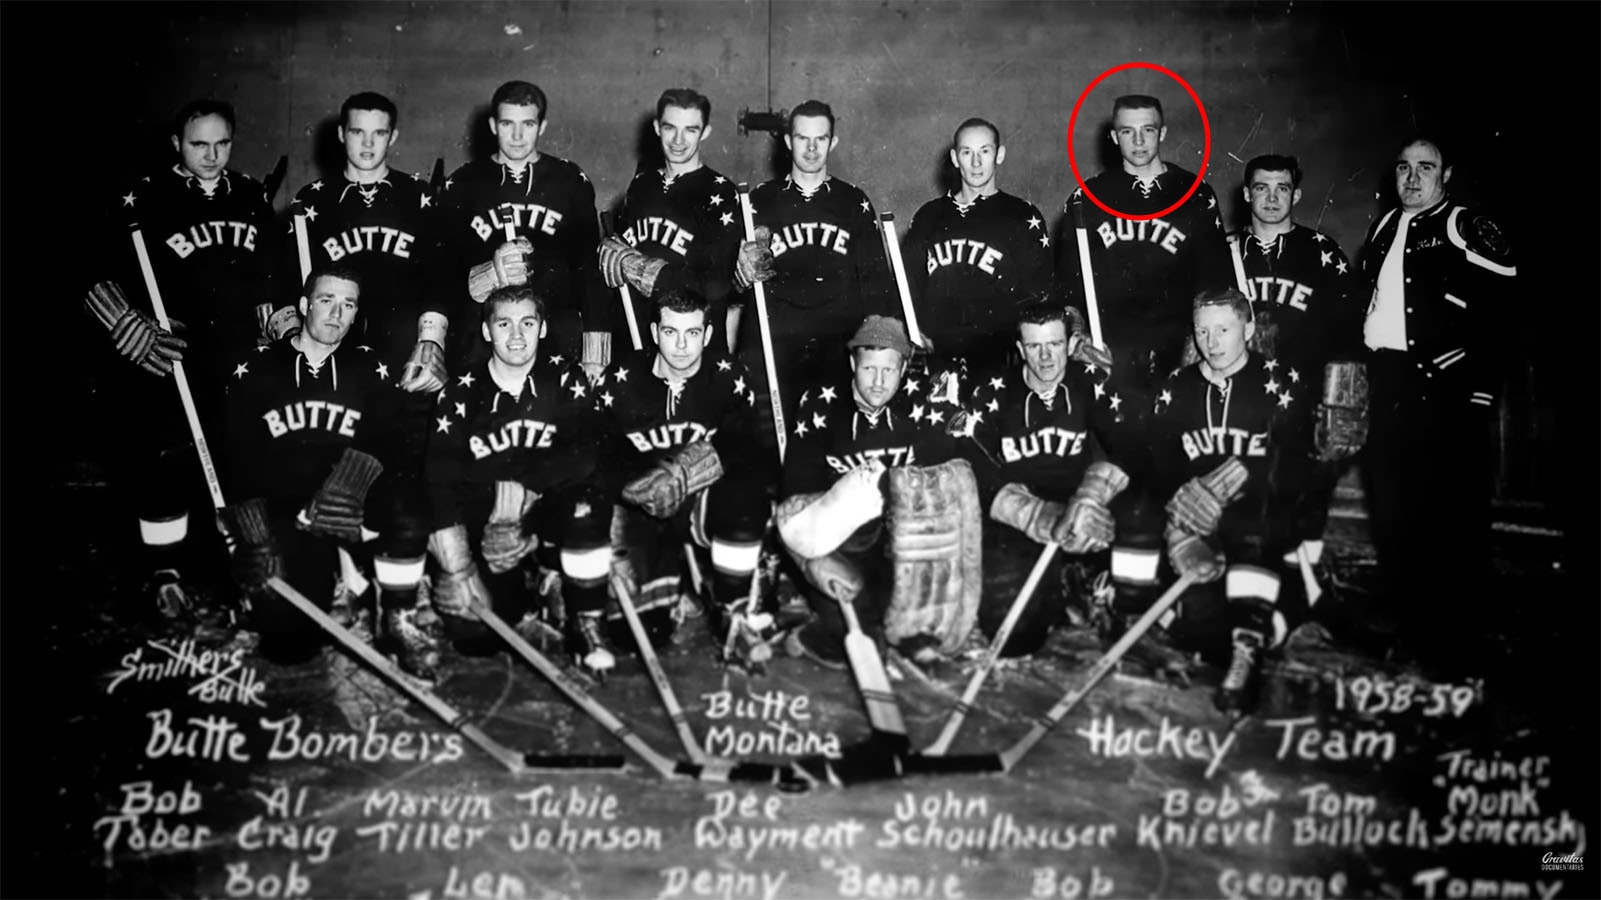 Evel Knievel as a member of the Butte Bombers hockey team in 1959.